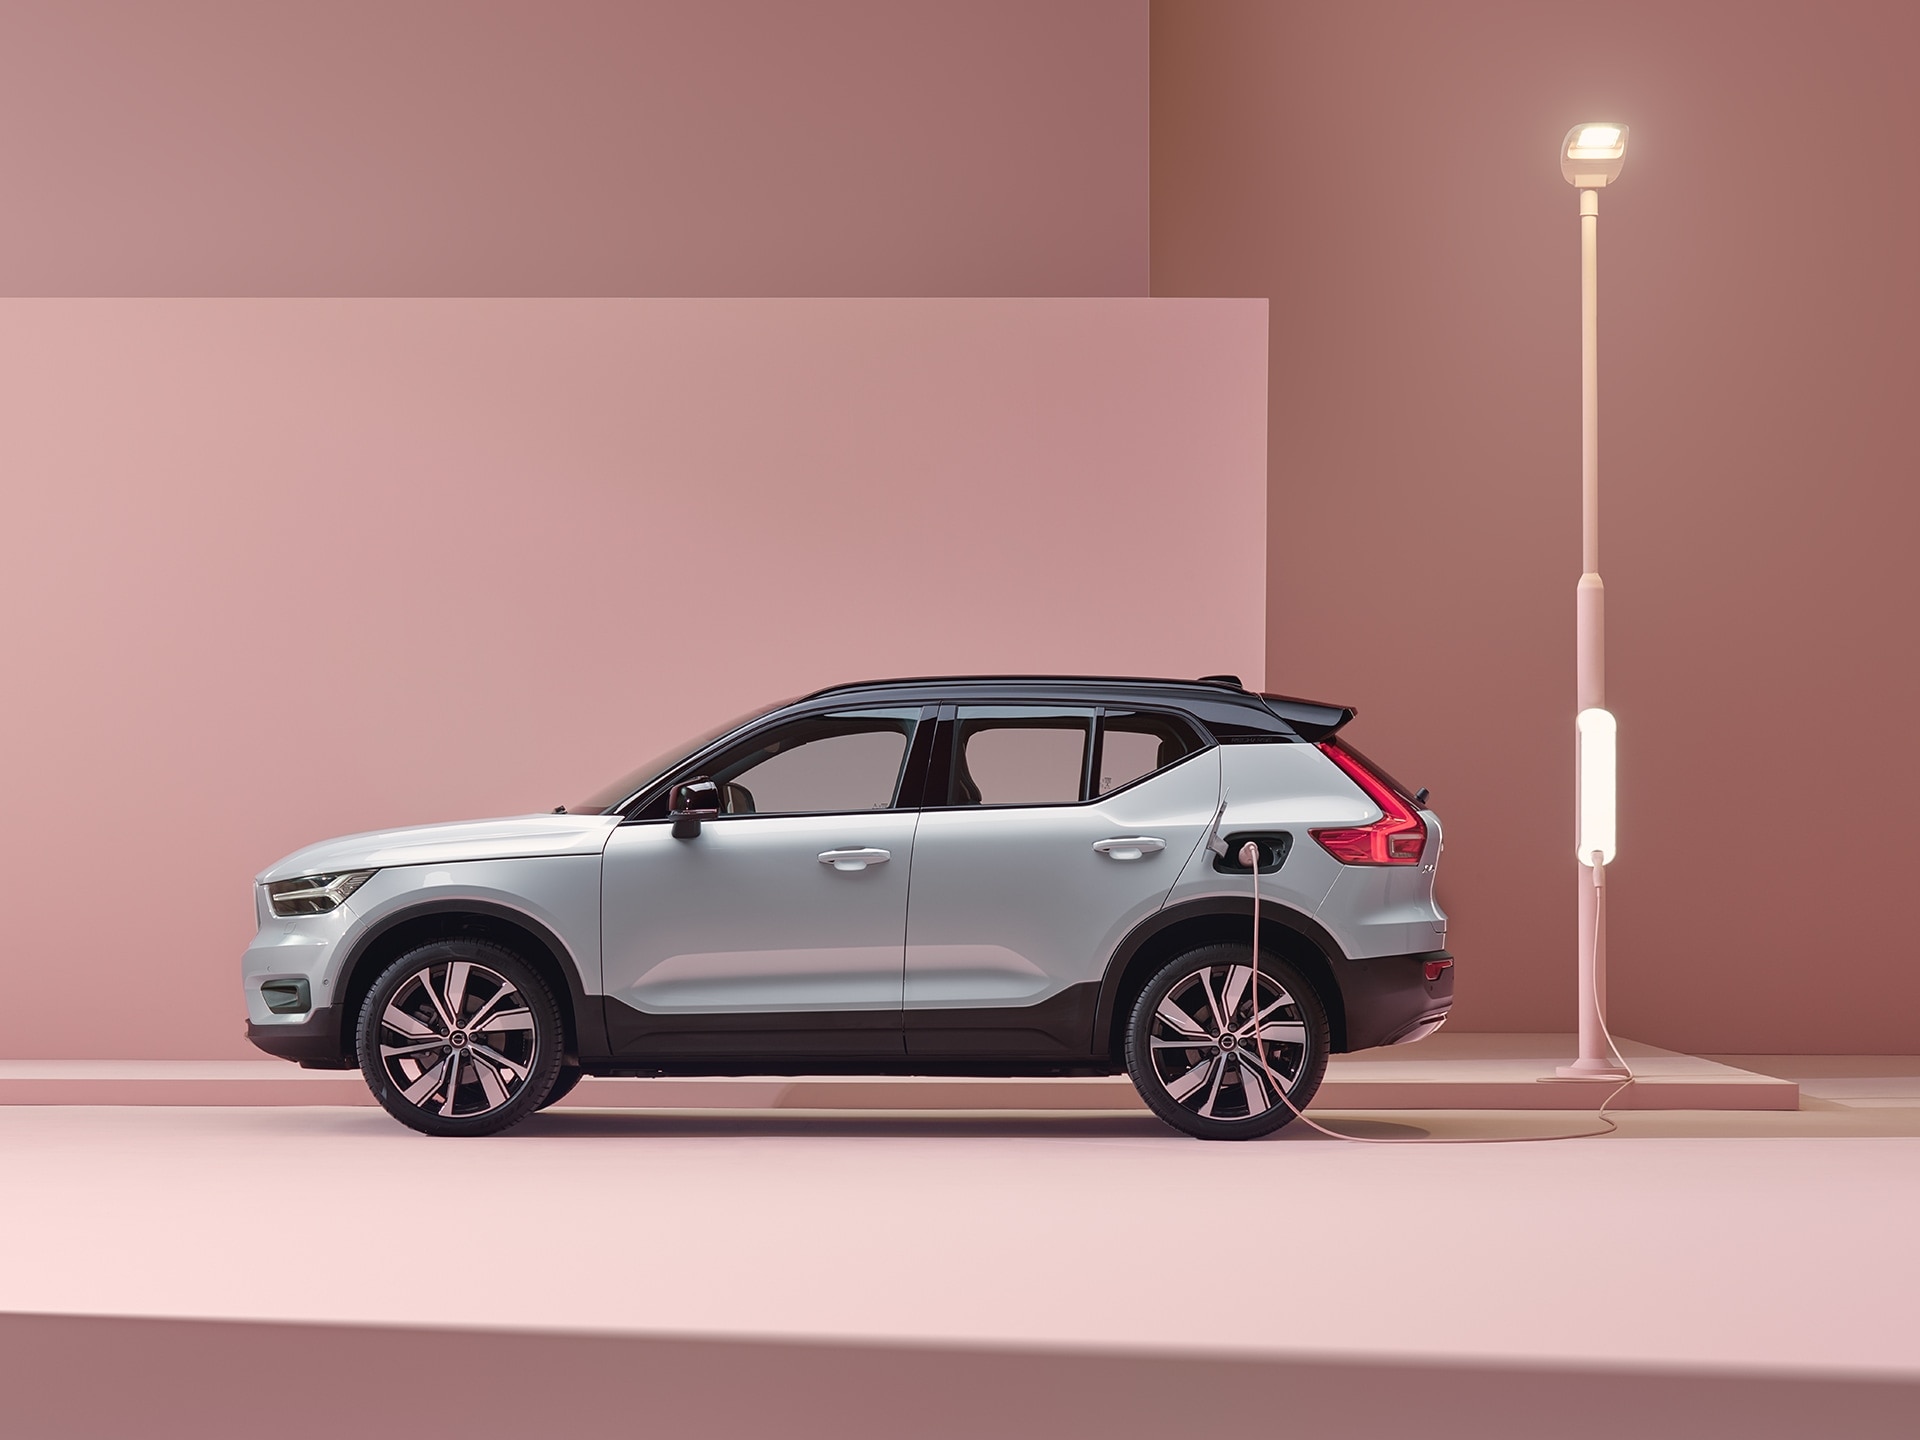 A glacier silver Volvo XC40 Recharge electric SUV charged in a pink city.